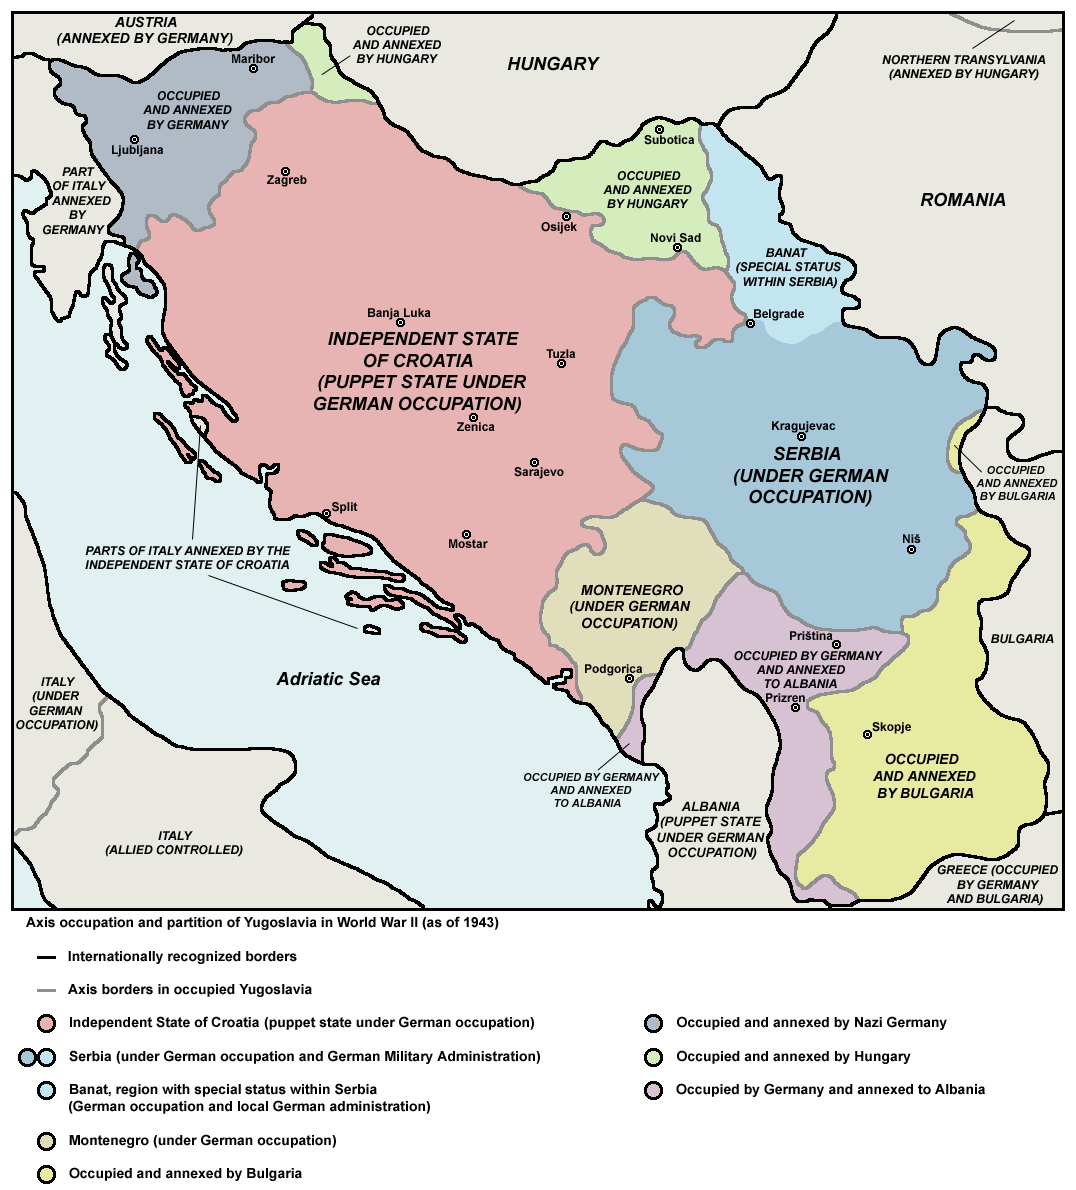 Occupation and partition of Yugoslavia, 1943-44.